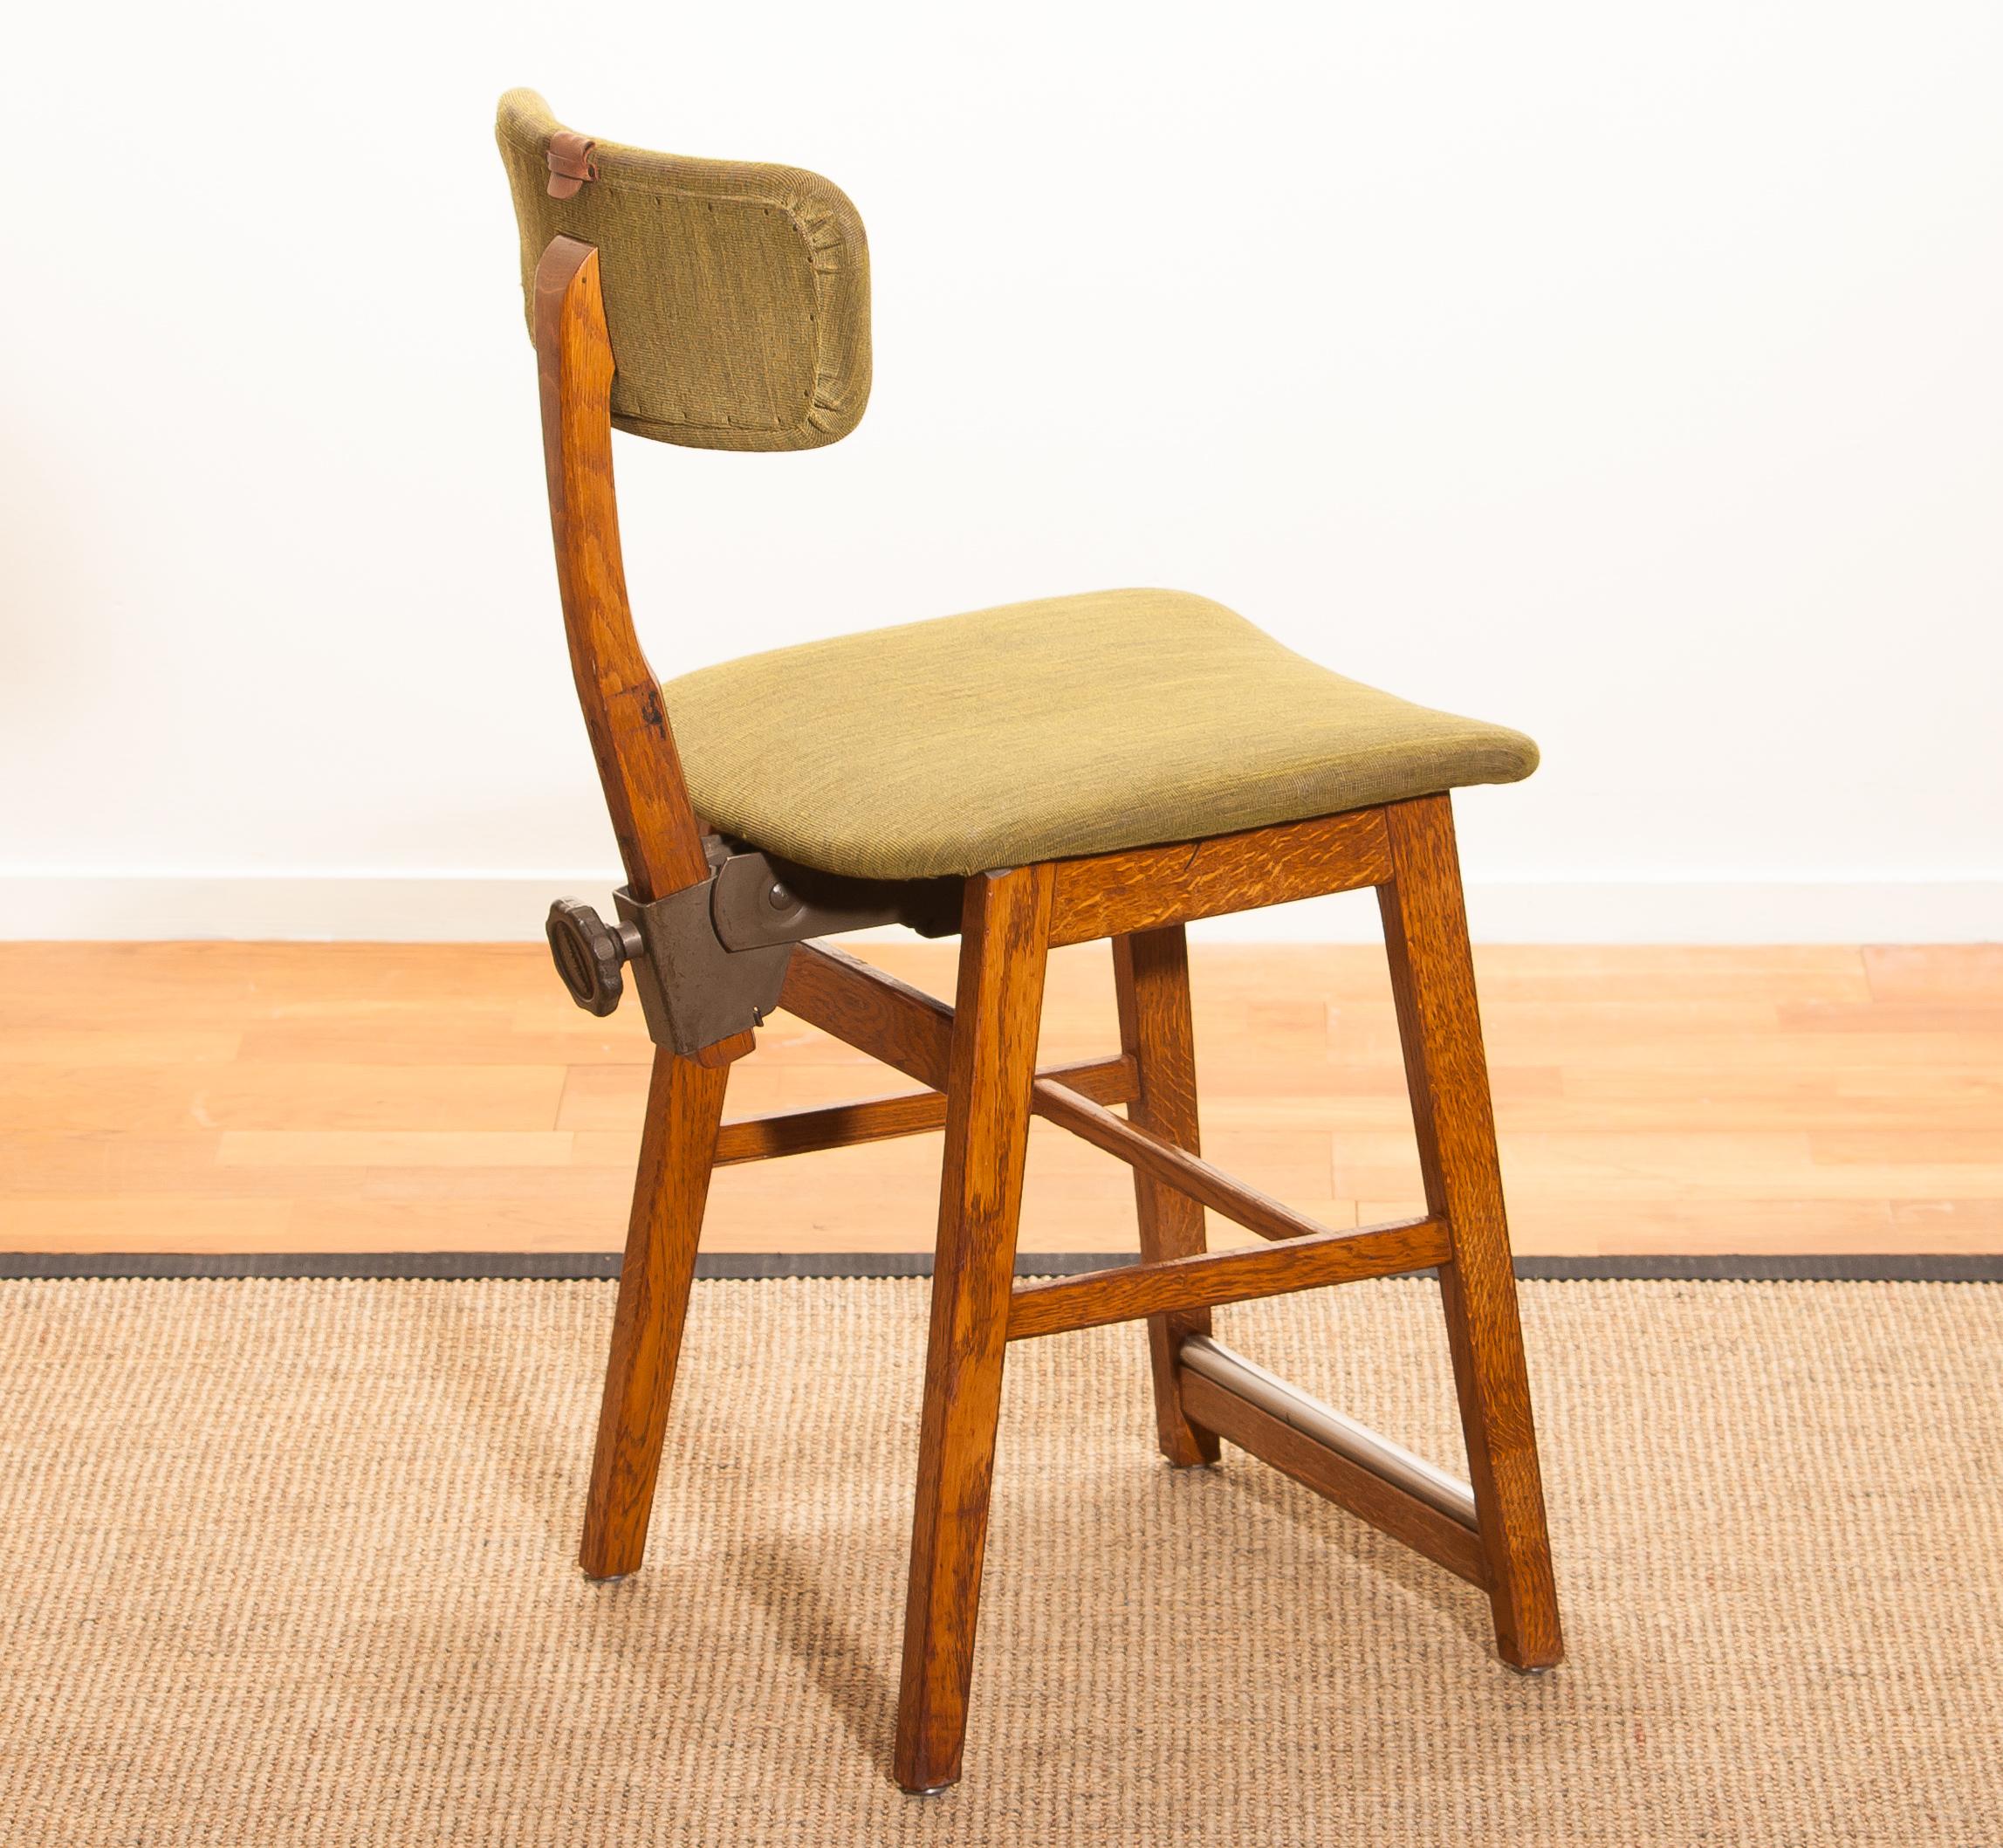 1960s, Teak and Wool Desk Chair by Âtvidabergs, Sweden 3